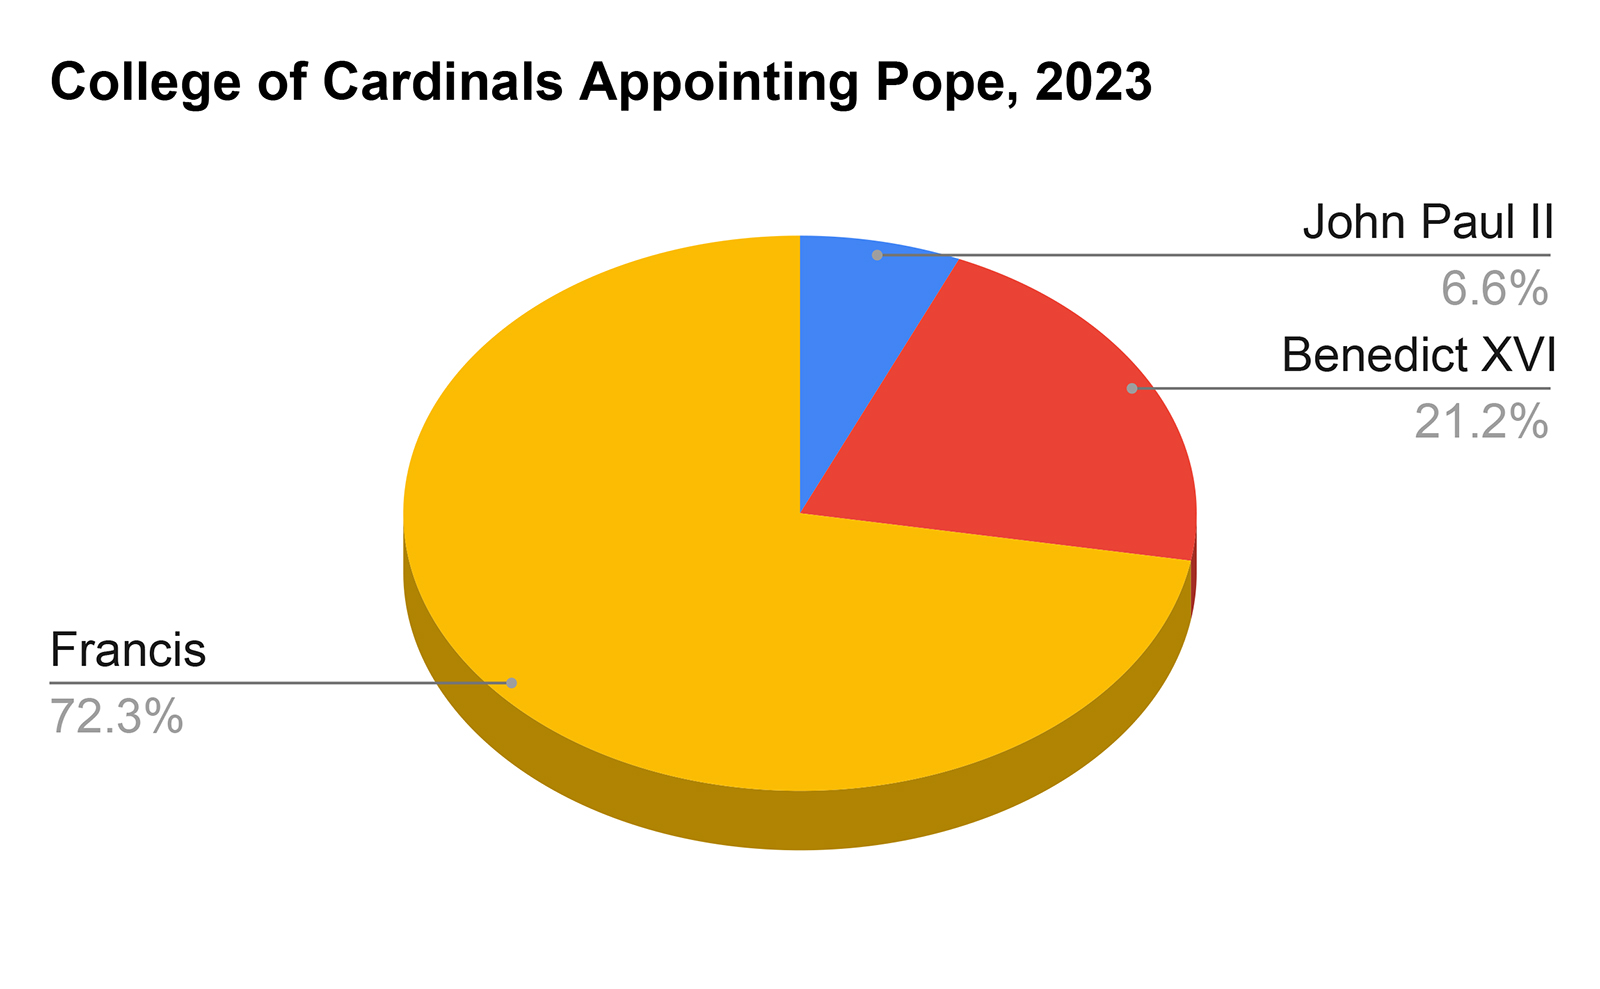 "College of Cardinals Appointing Pope, 2023" Sources: Publicly available Vatican data, Wikipedia, independent RNS reporting. RNS graphic